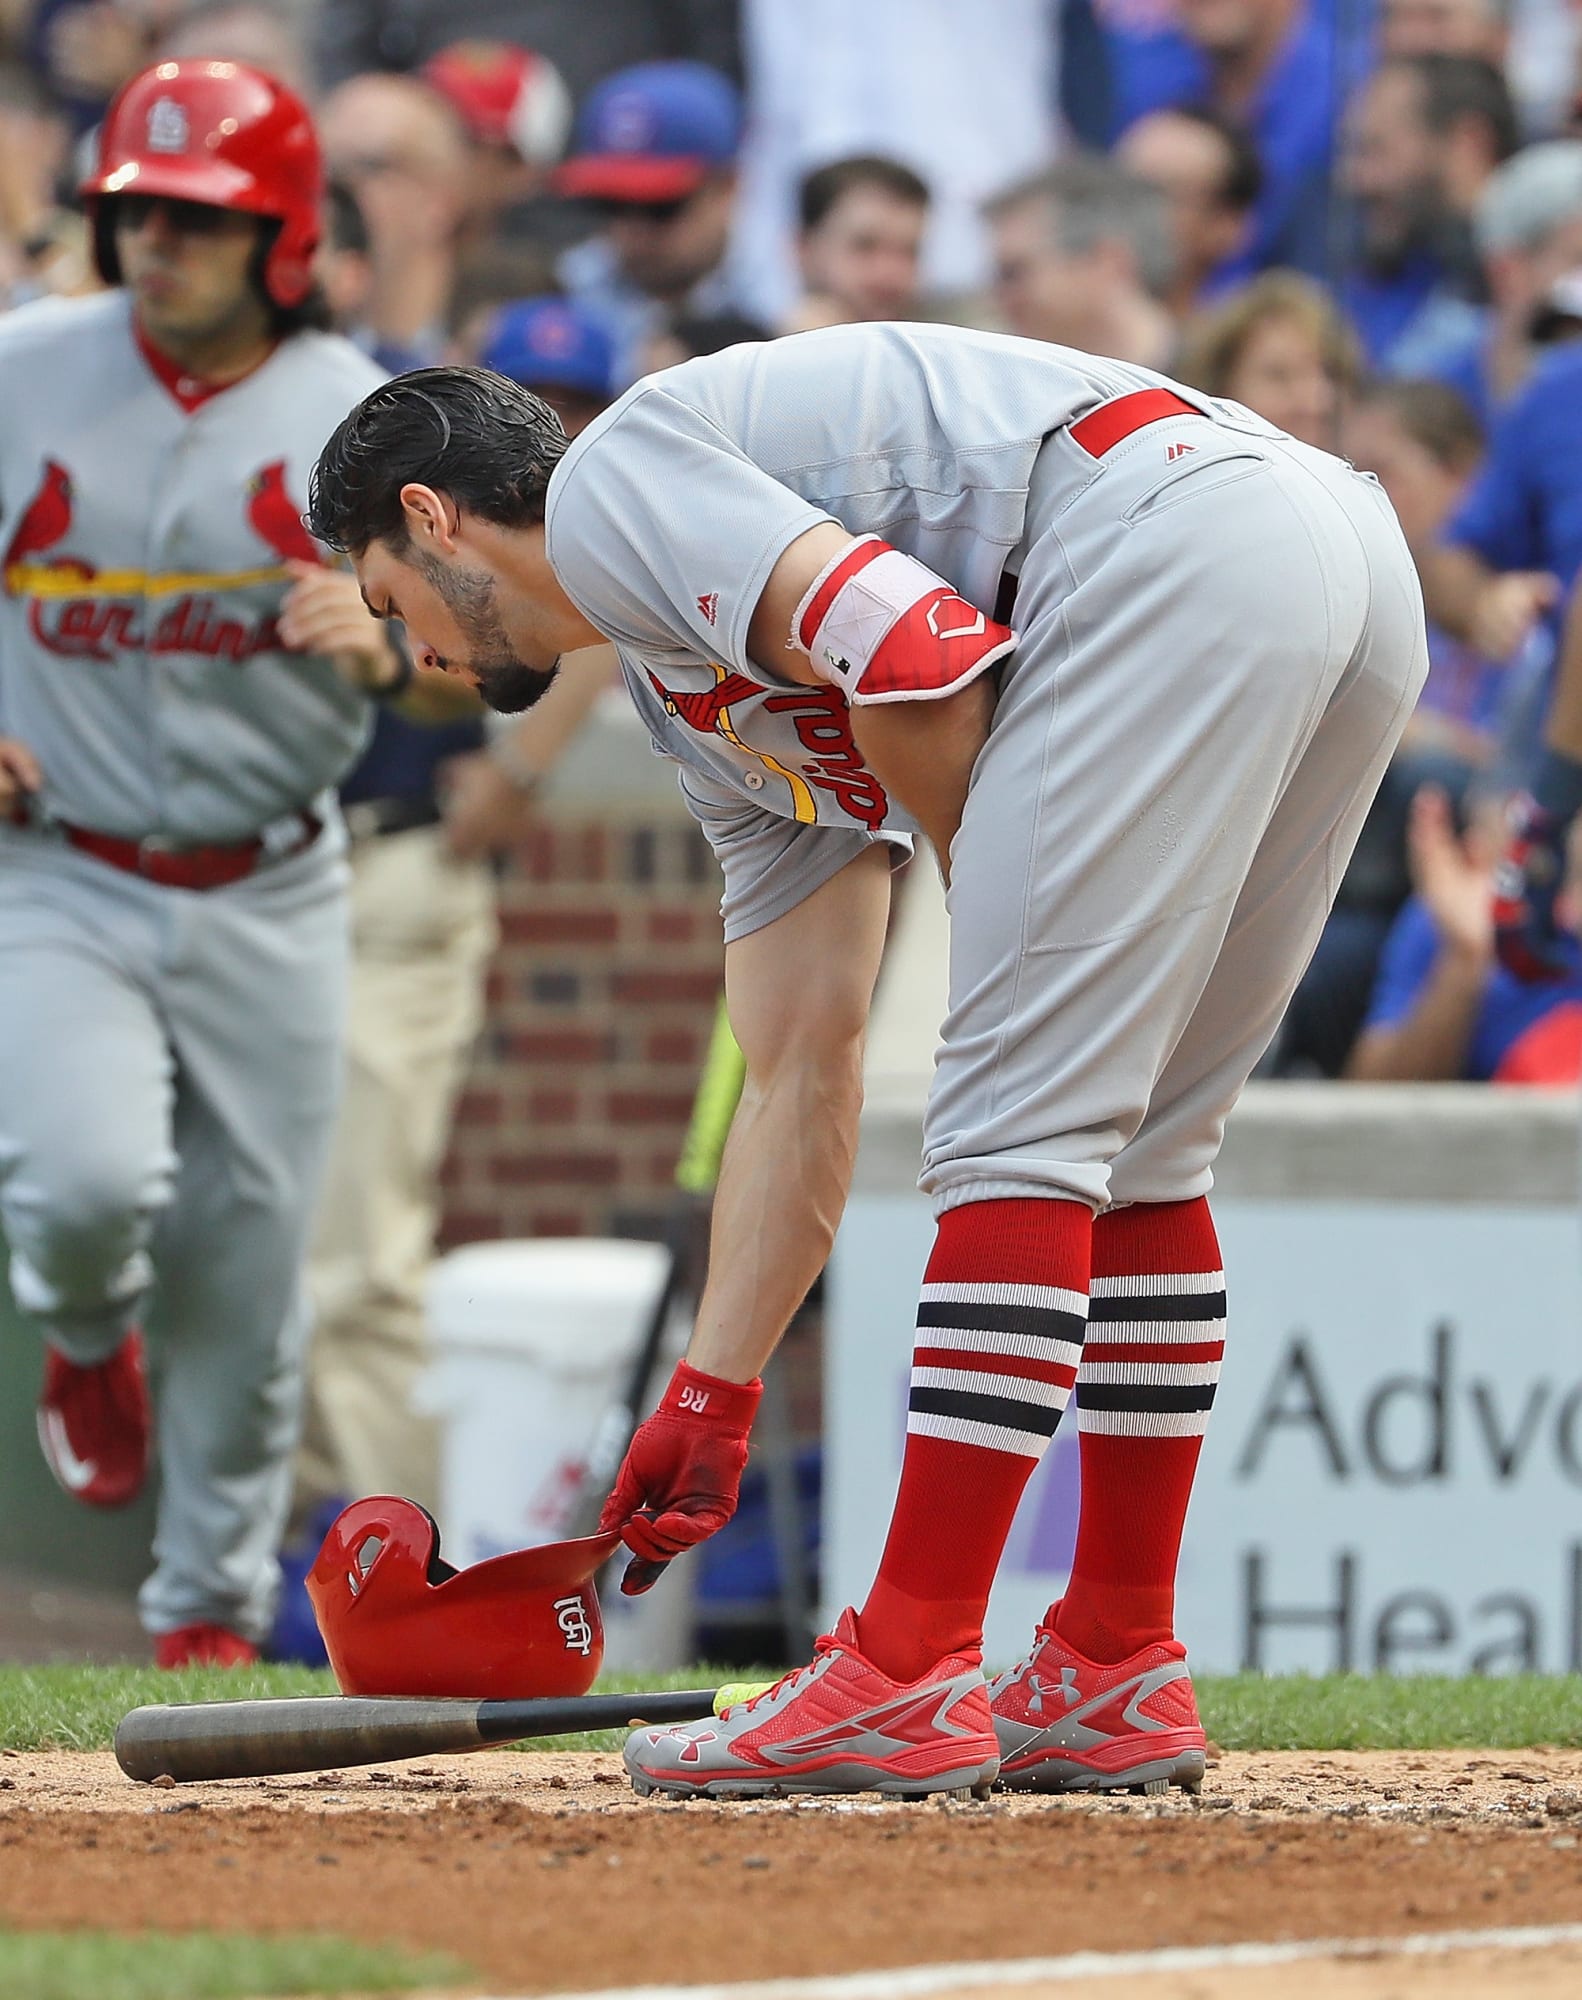 St. Louis Cardinals: Grichuk&#39;s comments give too much credit